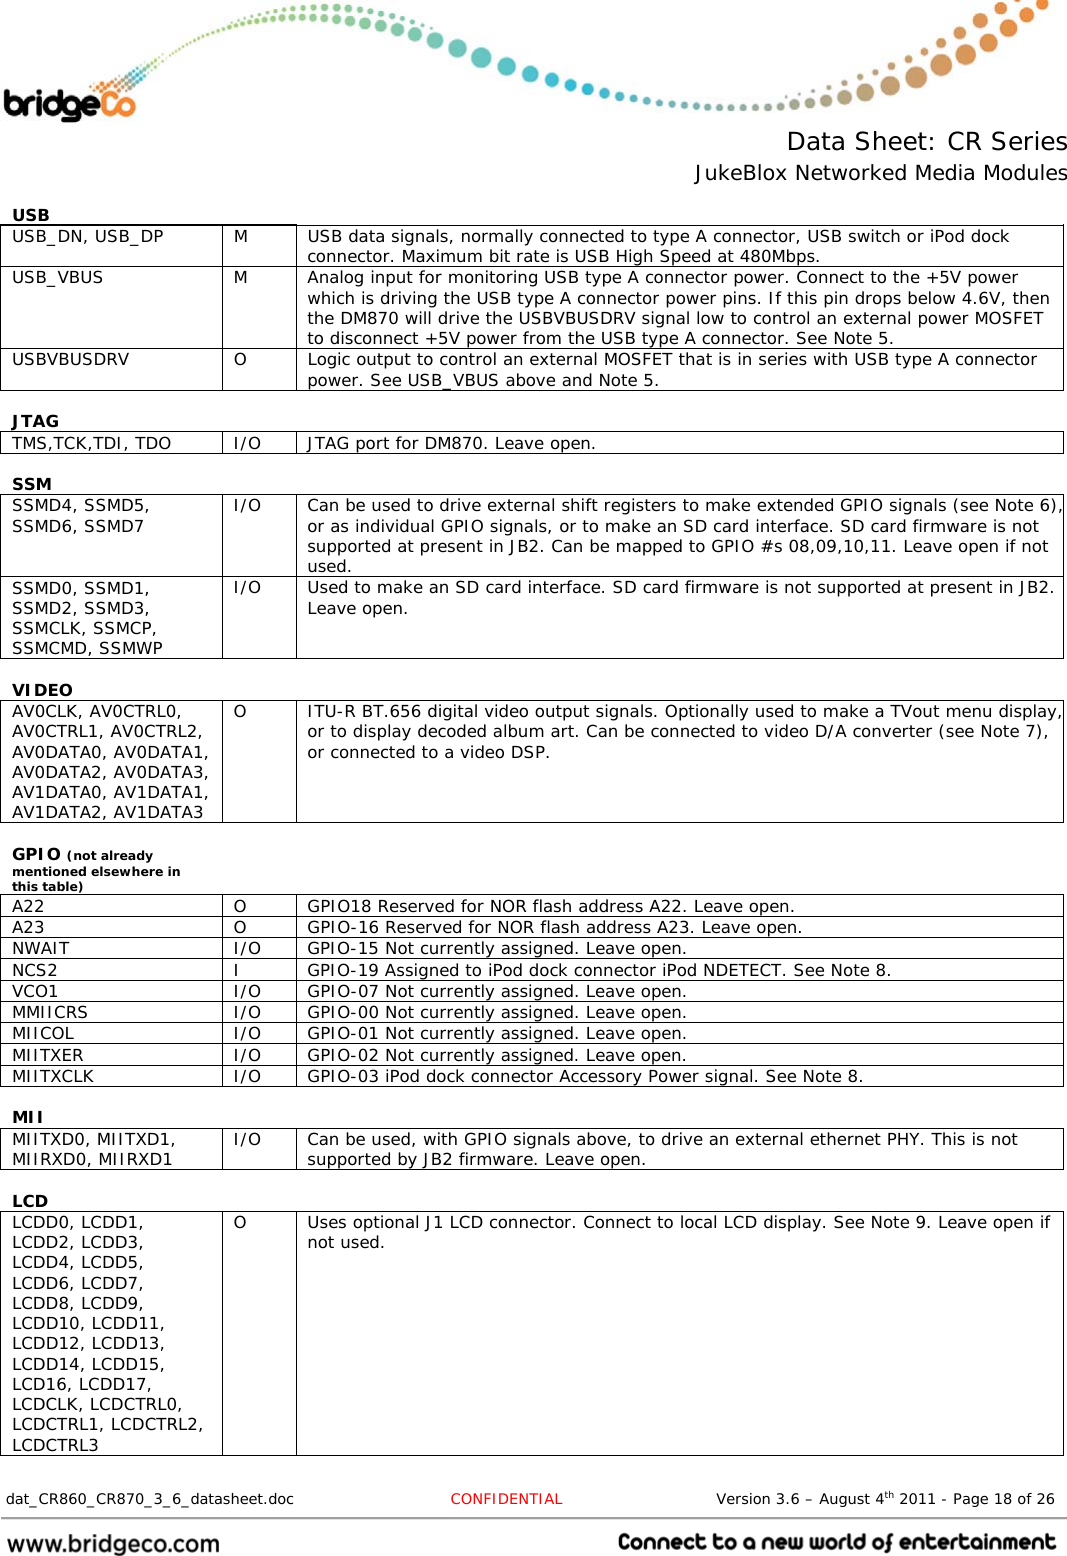  Data Sheet: CR Series JukeBlox Networked Media Modules  dat_CR860_CR870_3_6_datasheet.doc  CONFIDENTIAL                              Version 3.6 – August 4th 2011 - Page 18 of 26                                  USB    USB_DN, USB_DP  M  USB data signals, normally connected to type A connector, USB switch or iPod dock connector. Maximum bit rate is USB High Speed at 480Mbps. USB_VBUS  M  Analog input for monitoring USB type A connector power. Connect to the +5V power which is driving the USB type A connector power pins. If this pin drops below 4.6V, then the DM870 will drive the USBVBUSDRV signal low to control an external power MOSFET to disconnect +5V power from the USB type A connector. See Note 5. USBVBUSDRV  O  Logic output to control an external MOSFET that is in series with USB type A connector power. See USB_VBUS above and Note 5.  JTAG    TMS,TCK,TDI, TDO  I/O  JTAG port for DM870. Leave open.  SSM    SSMD4, SSMD5, SSMD6, SSMD7  I/O  Can be used to drive external shift registers to make extended GPIO signals (see Note 6),or as individual GPIO signals, or to make an SD card interface. SD card firmware is not supported at present in JB2. Can be mapped to GPIO #s 08,09,10,11. Leave open if not used. SSMD0, SSMD1, SSMD2, SSMD3, SSMCLK, SSMCP, SSMCMD, SSMWP I/O  Used to make an SD card interface. SD card firmware is not supported at present in JB2. Leave open.  VIDEO    AV0CLK, AV0CTRL0, AV0CTRL1, AV0CTRL2, AV0DATA0, AV0DATA1, AV0DATA2, AV0DATA3, AV1DATA0, AV1DATA1, AV1DATA2, AV1DATA3  O  ITU-R BT.656 digital video output signals. Optionally used to make a TVout menu display, or to display decoded album art. Can be connected to video D/A converter (see Note 7), or connected to a video DSP.  GPIO (not already mentioned elsewhere in this table)   A22  O  GPIO18 Reserved for NOR flash address A22. Leave open. A23  O  GPIO-16 Reserved for NOR flash address A23. Leave open. NWAIT  I/O  GPIO-15 Not currently assigned. Leave open. NCS2  I  GPIO-19 Assigned to iPod dock connector iPod NDETECT. See Note 8. VCO1  I/O  GPIO-07 Not currently assigned. Leave open. MMIICRS  I/O  GPIO-00 Not currently assigned. Leave open. MIICOL  I/O  GPIO-01 Not currently assigned. Leave open. MIITXER  I/O  GPIO-02 Not currently assigned. Leave open. MIITXCLK  I/O  GPIO-03 iPod dock connector Accessory Power signal. See Note 8.  MII    MIITXD0, MIITXD1, MIIRXD0, MIIRXD1  I/O  Can be used, with GPIO signals above, to drive an external ethernet PHY. This is not supported by JB2 firmware. Leave open.  LCD    LCDD0, LCDD1, LCDD2, LCDD3, LCDD4, LCDD5, LCDD6, LCDD7, LCDD8, LCDD9, LCDD10, LCDD11, LCDD12, LCDD13, LCDD14, LCDD15, LCD16, LCDD17, LCDCLK, LCDCTRL0, LCDCTRL1, LCDCTRL2, LCDCTRL3 O  Uses optional J1 LCD connector. Connect to local LCD display. See Note 9. Leave open if not used. 